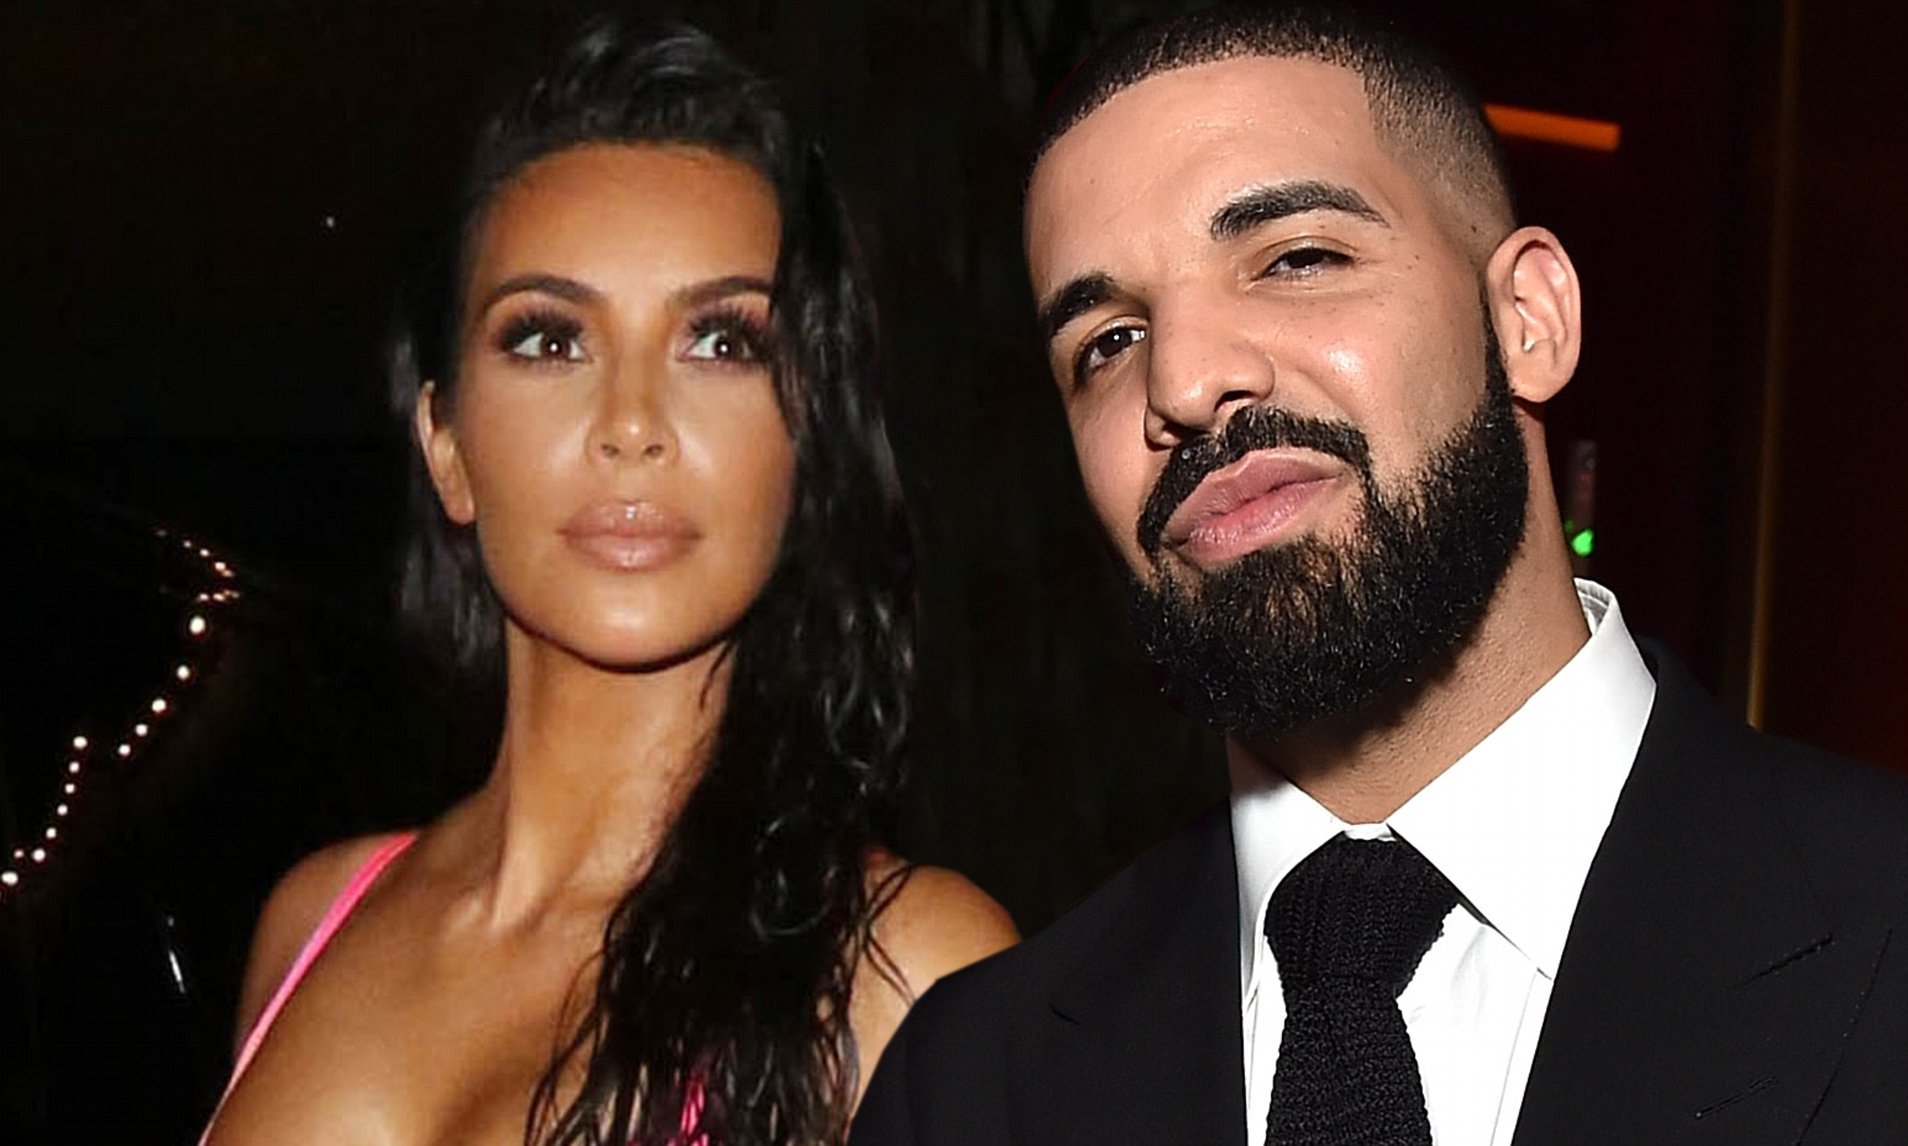 4fa75c14000005780imagea281535940329477 1.jpg?resize=412,275 - Drake Is After Newly-Single Kim Kardashian And Can't Wait To 'See Her Whenever She Says The Word', Insider Says